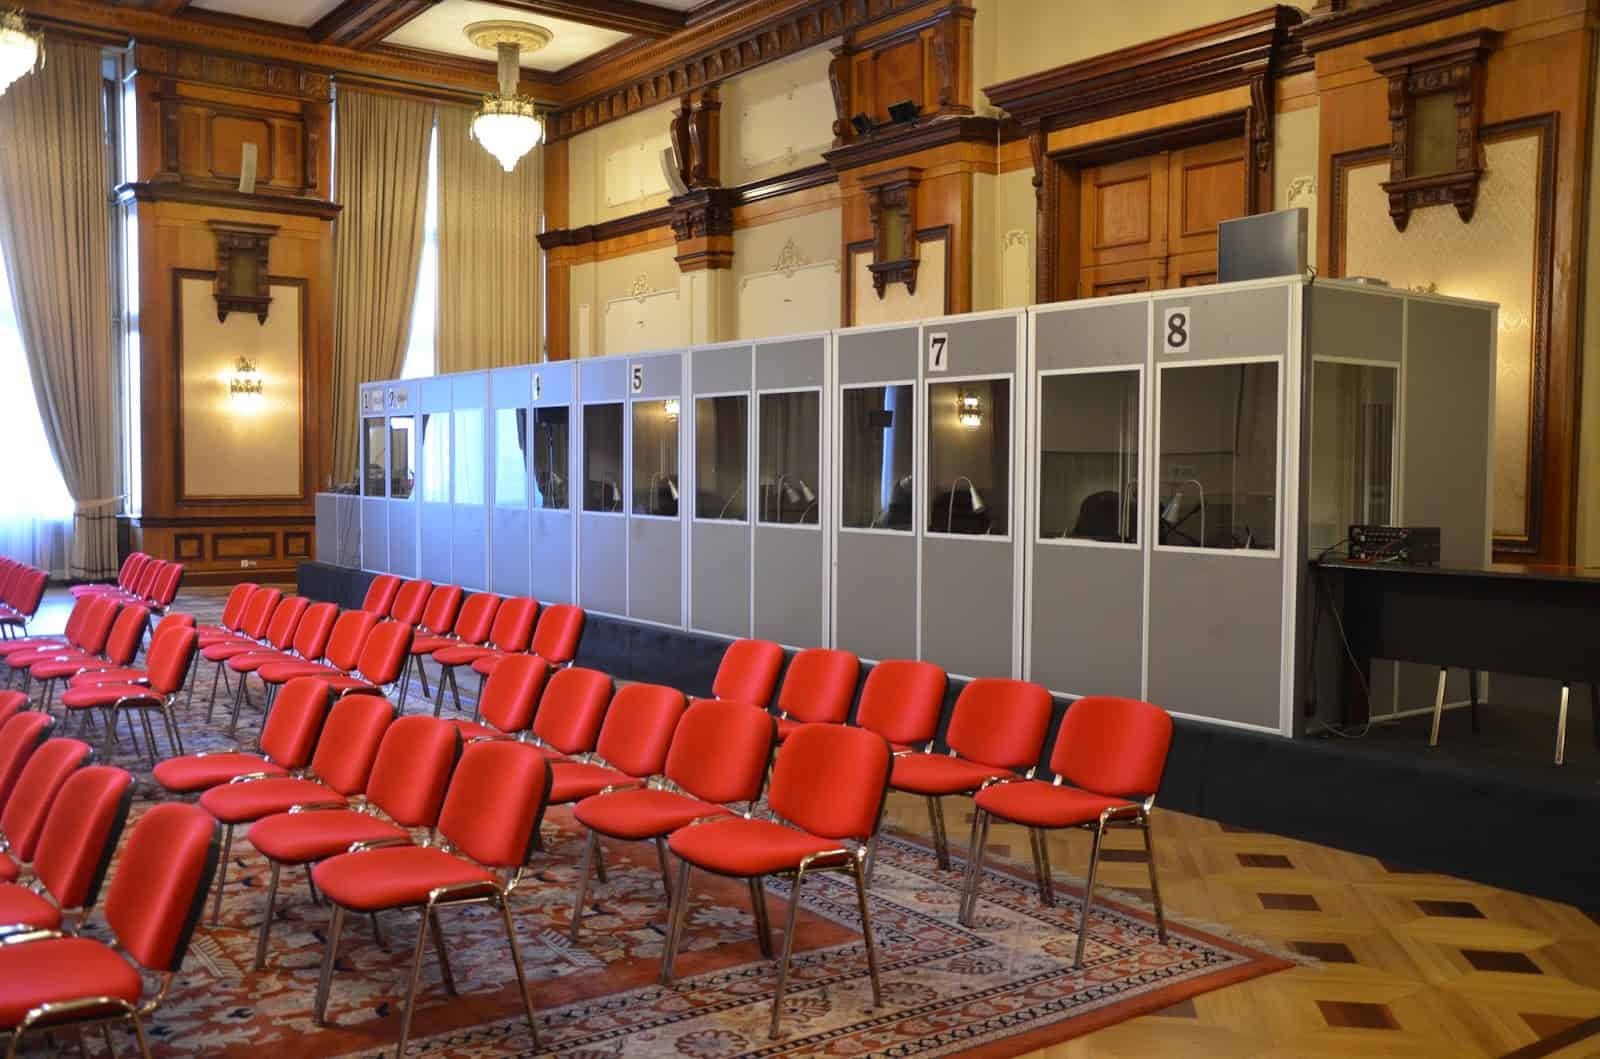 Translation booths in the meeting room at Palace of Parliament in Bucharest, Romania